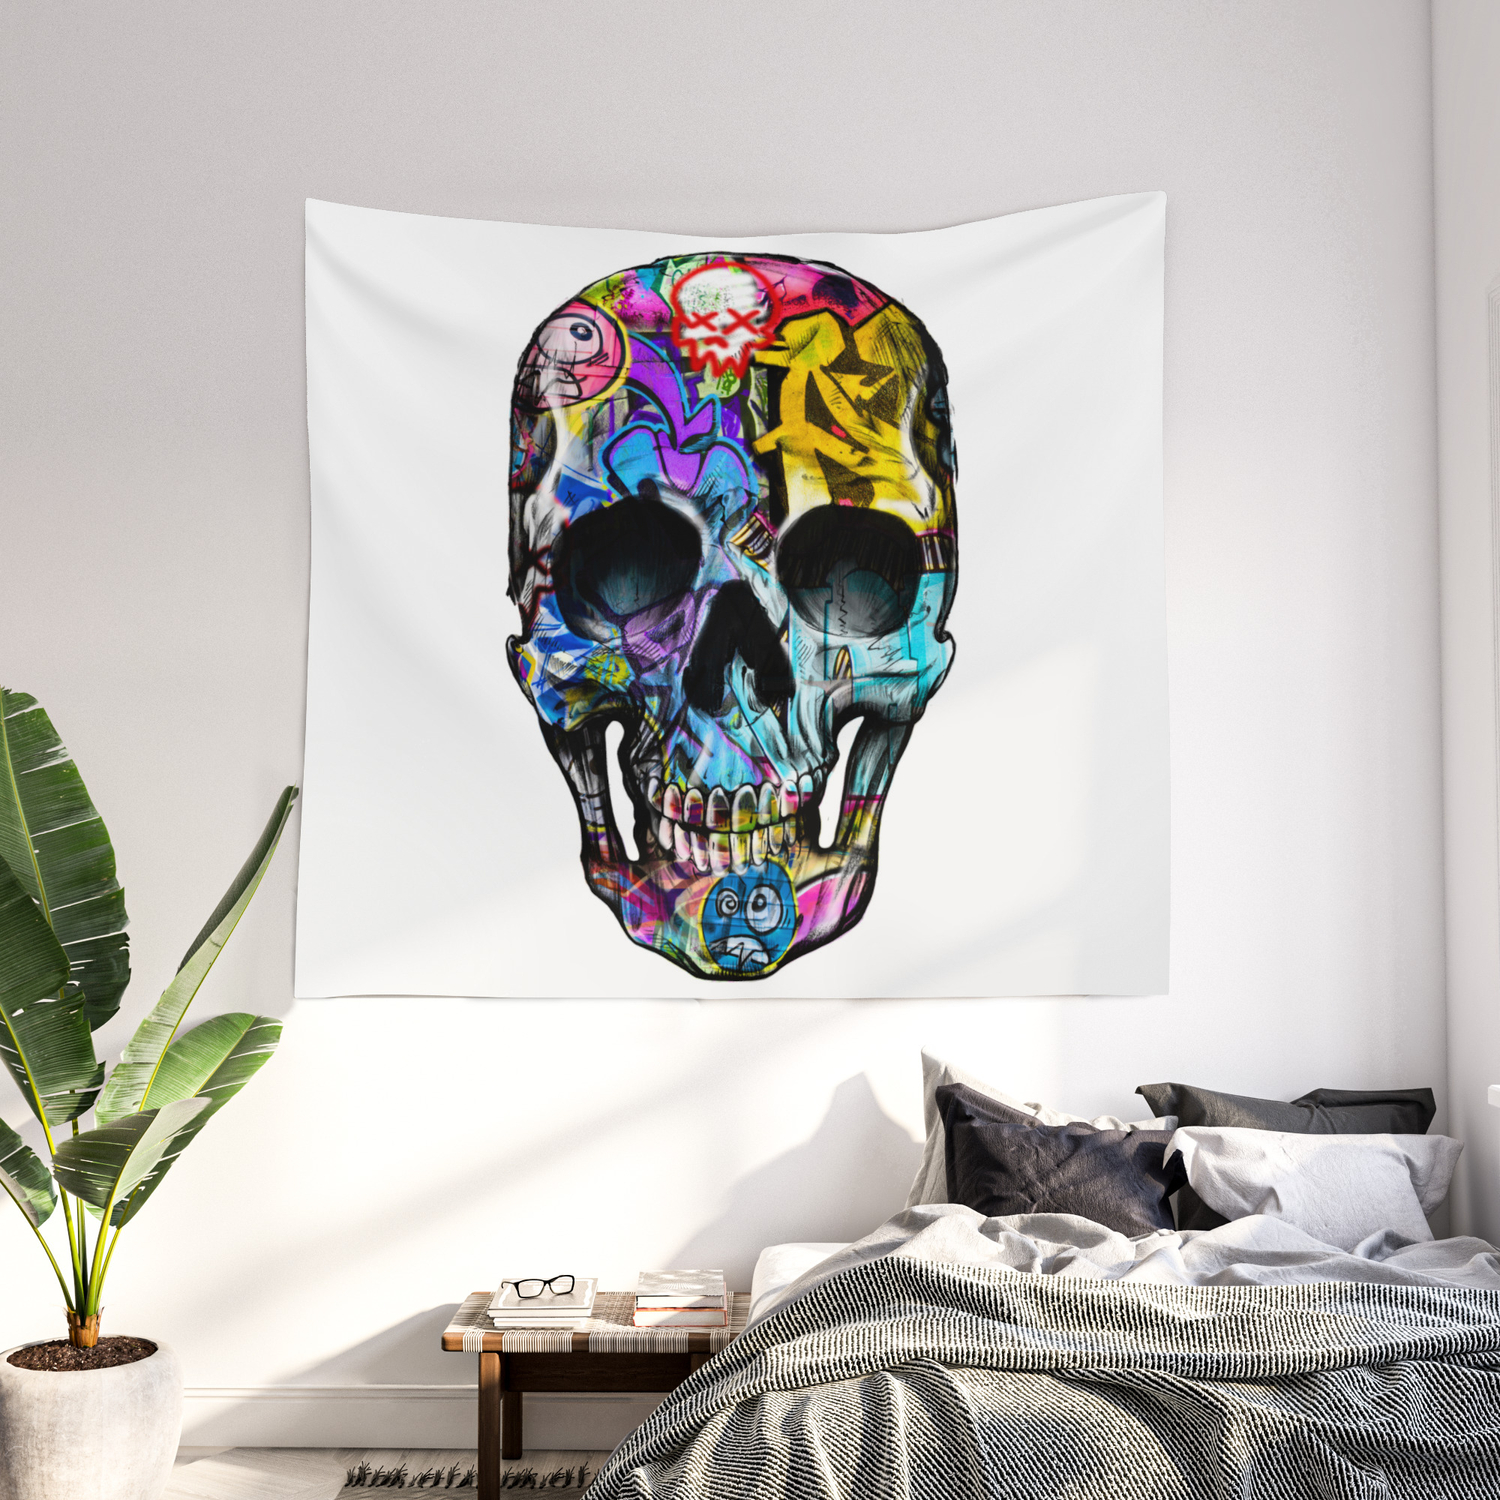 Skull Gun Tapestry Art Wall Hanging Sofa Table Bed Cover Home Decor 